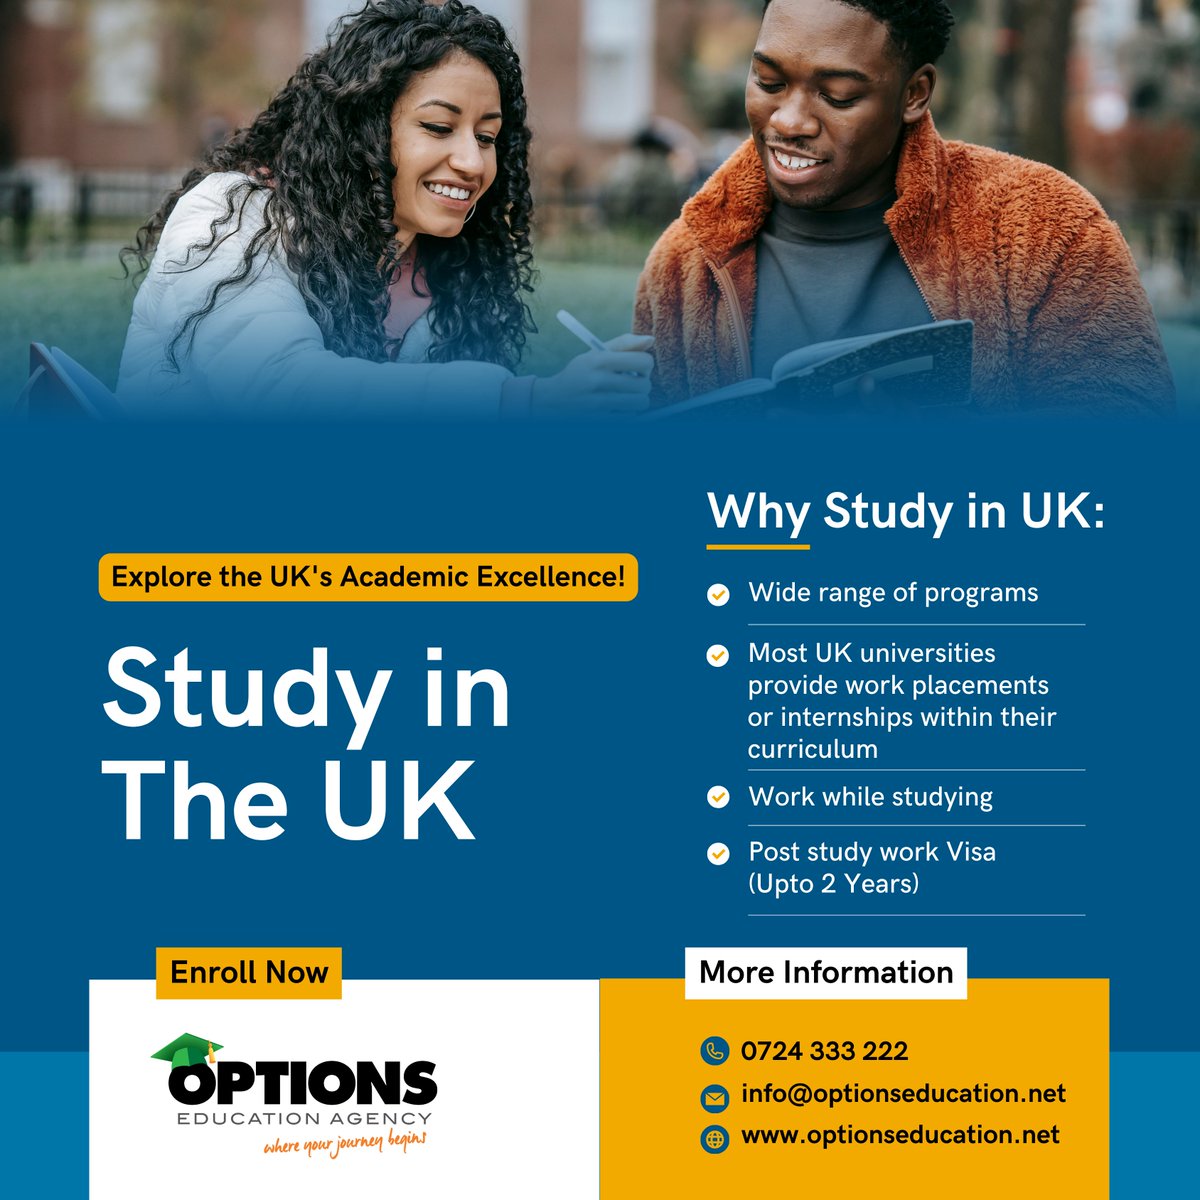 Dreaming of Studying in the UK? Make it a Reality with us! Dial 0724 333 222 now to take the first step towards your future! #studyabroad #studyinuk